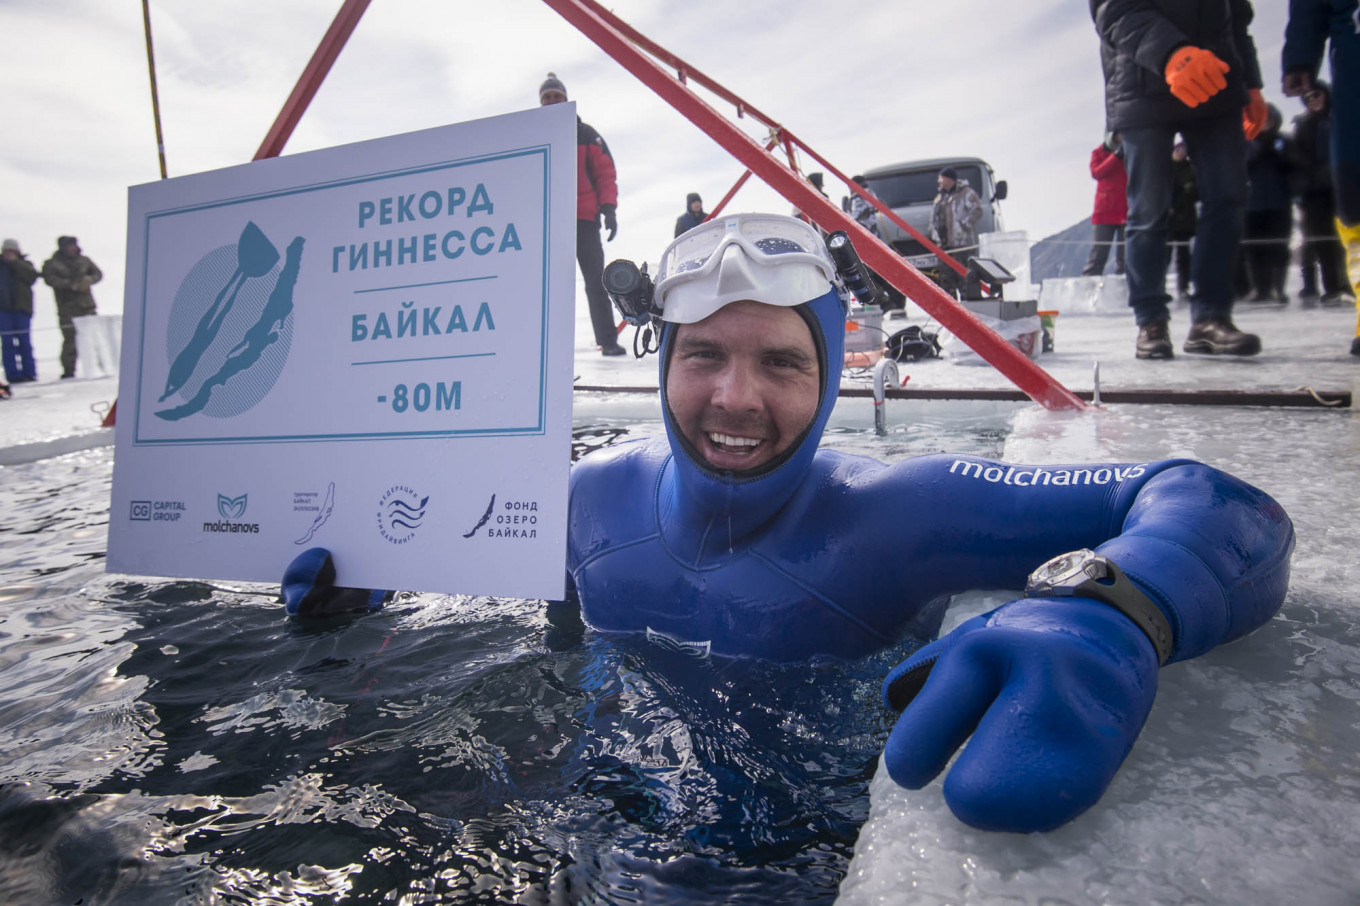 Russian Freediver Claims New Record in Icy Lake Baikal Plunge